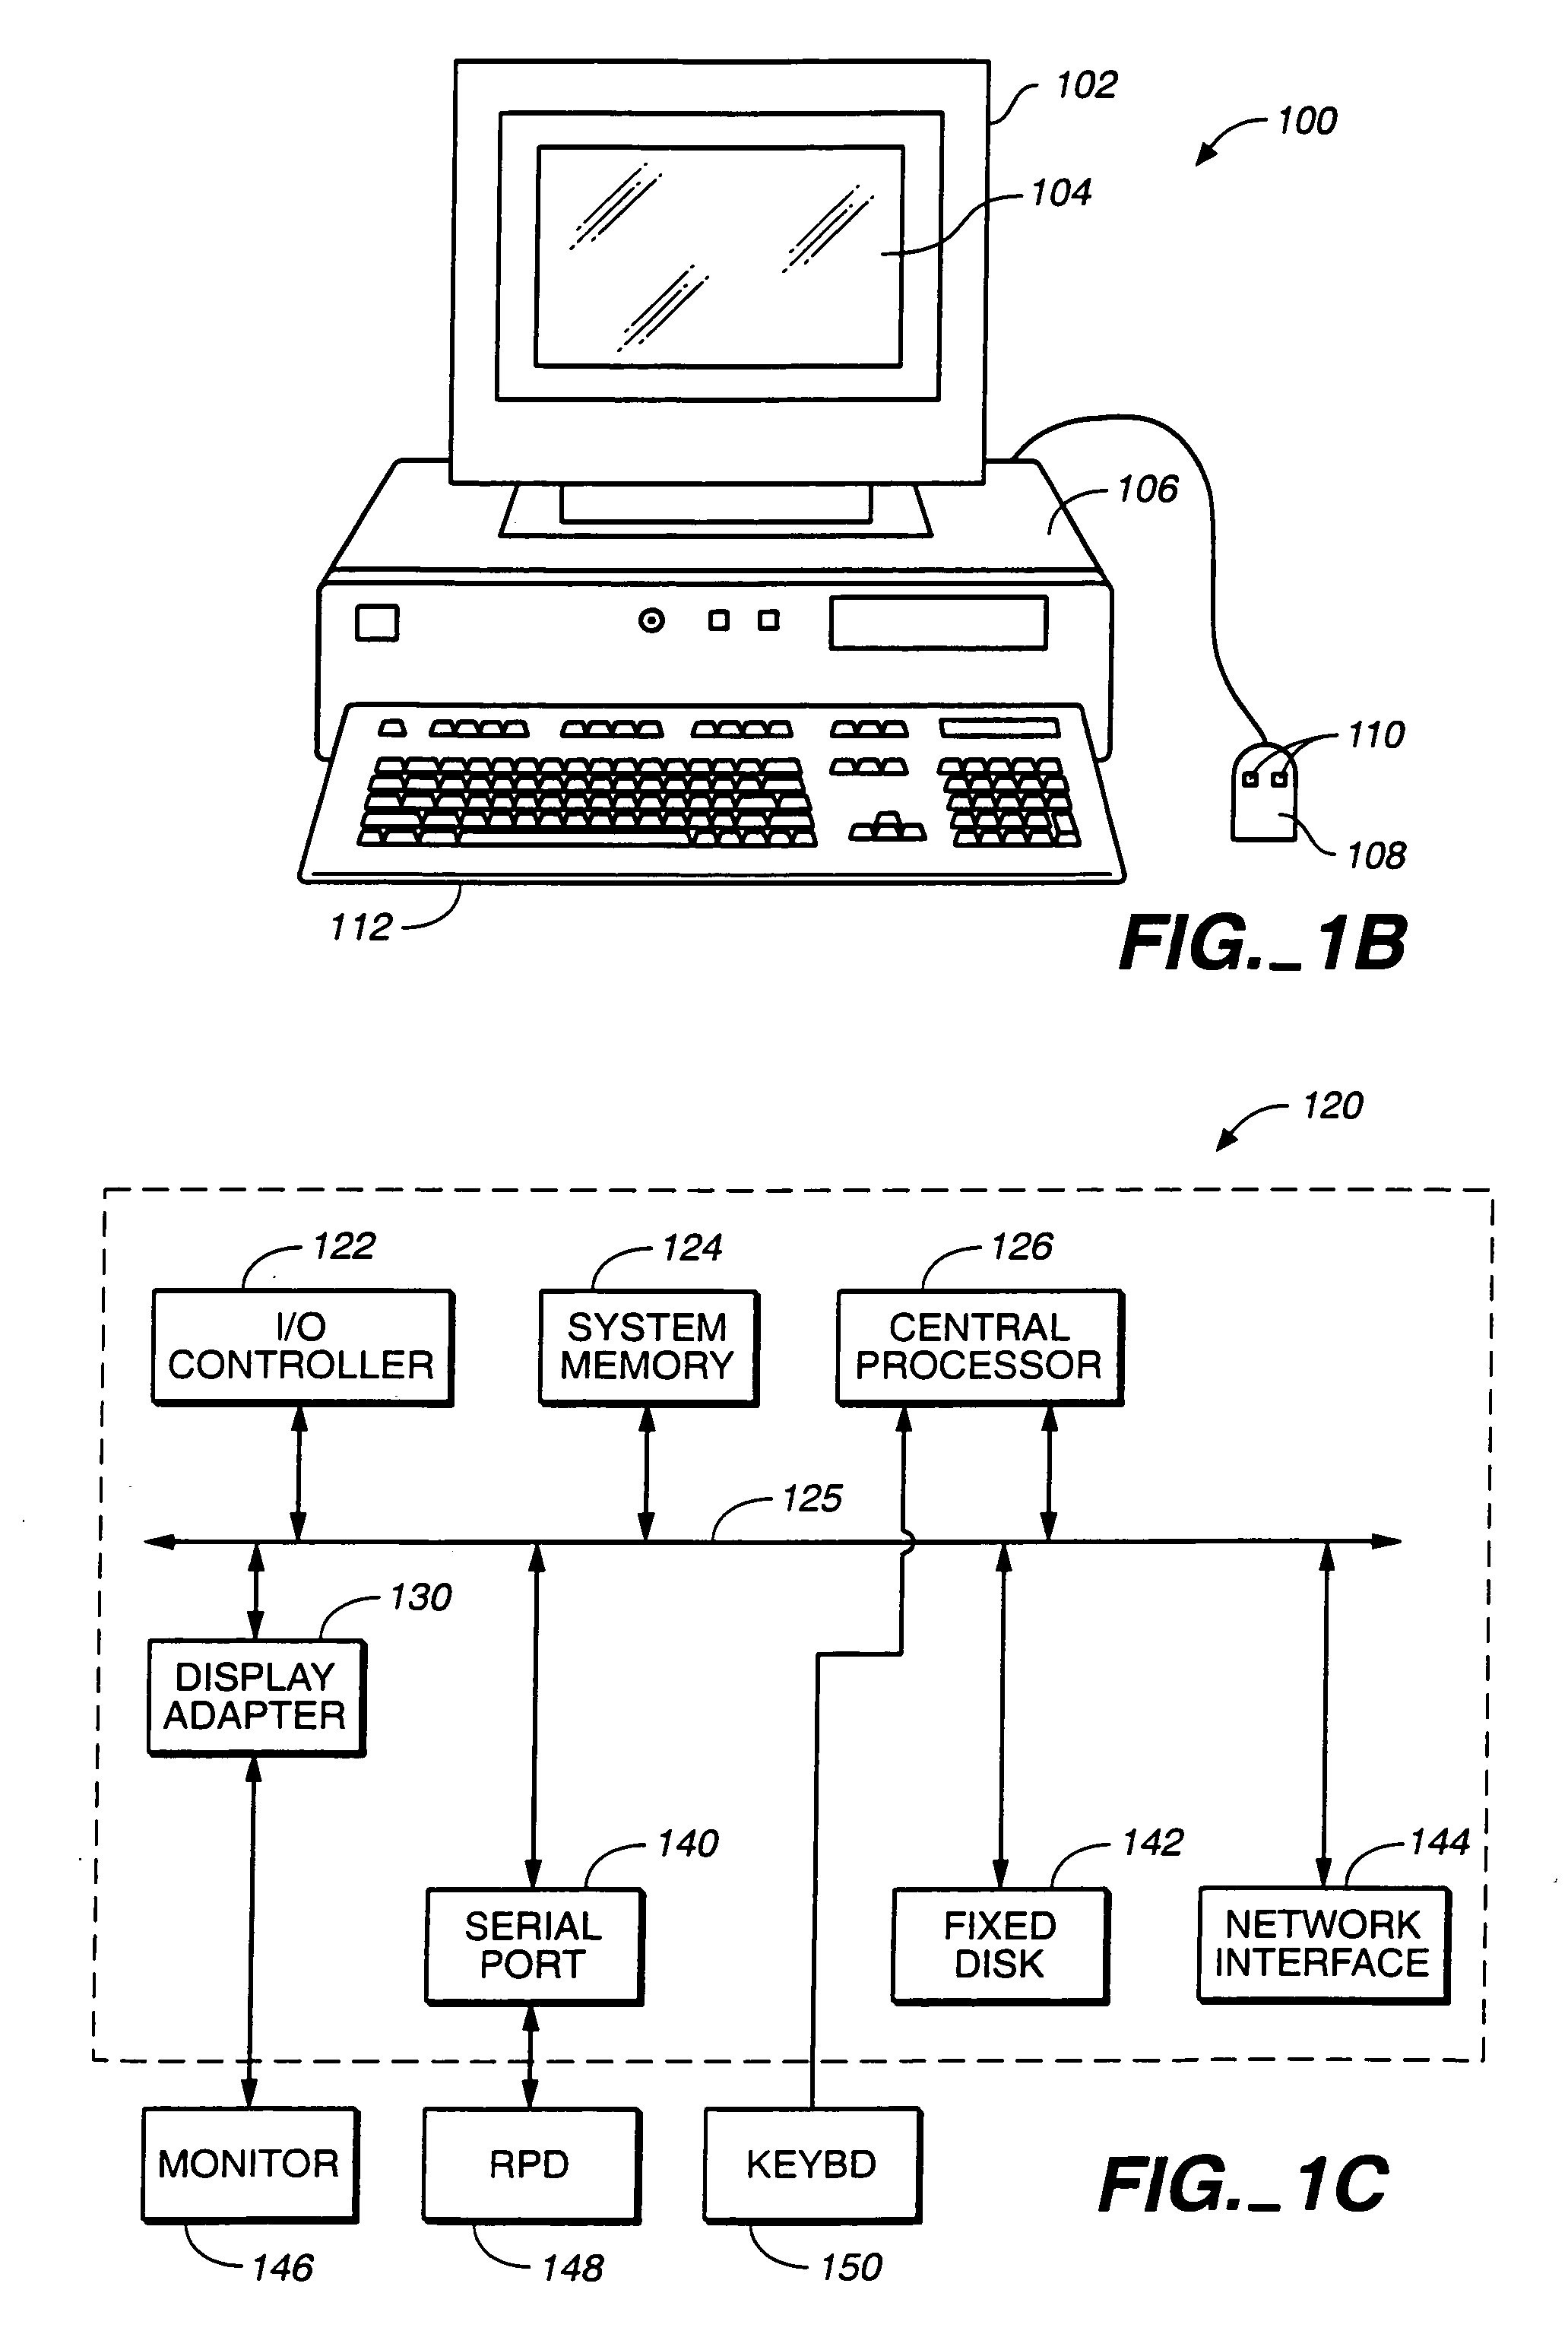 Automatic call distribution system using computer network-based communication